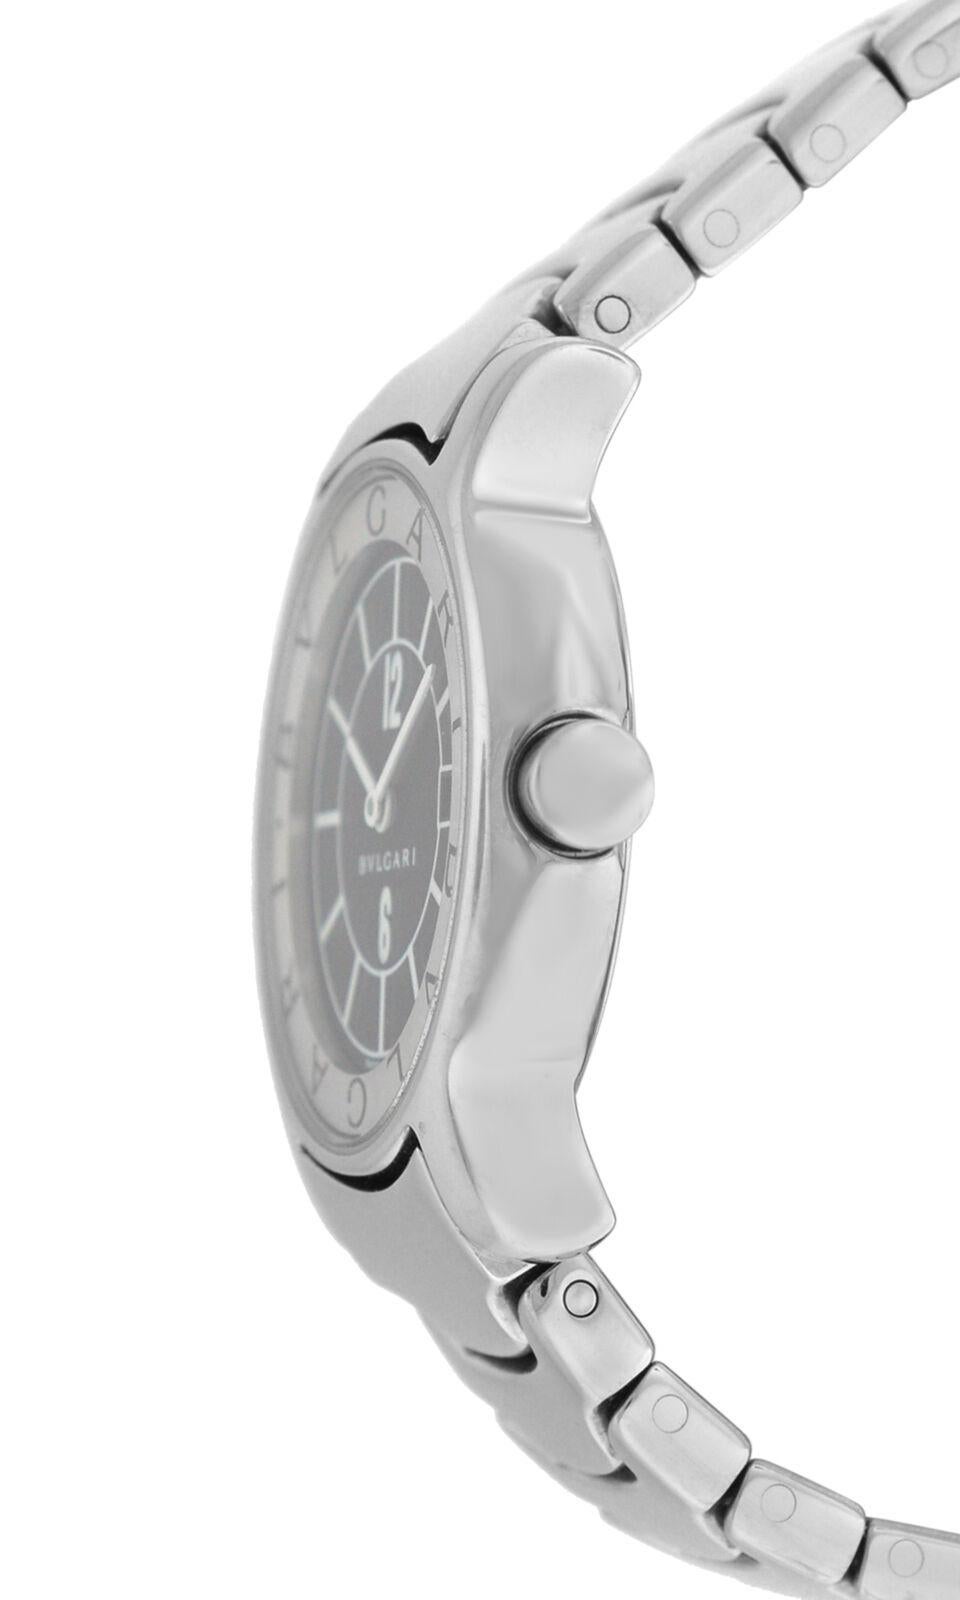 Brand	Bvlgari
Model	Solotempo ST29S
Gender	Ladies
Condition	Pre-owned
Movement	Swiss Quartz
Case Material	Stainless Steel 
Bracelet / Strap Material	
Stainless Steel

Clasp / Buckle Material	
Stainless Steel

Clasp Type	Butterfly deployment
Bracelet